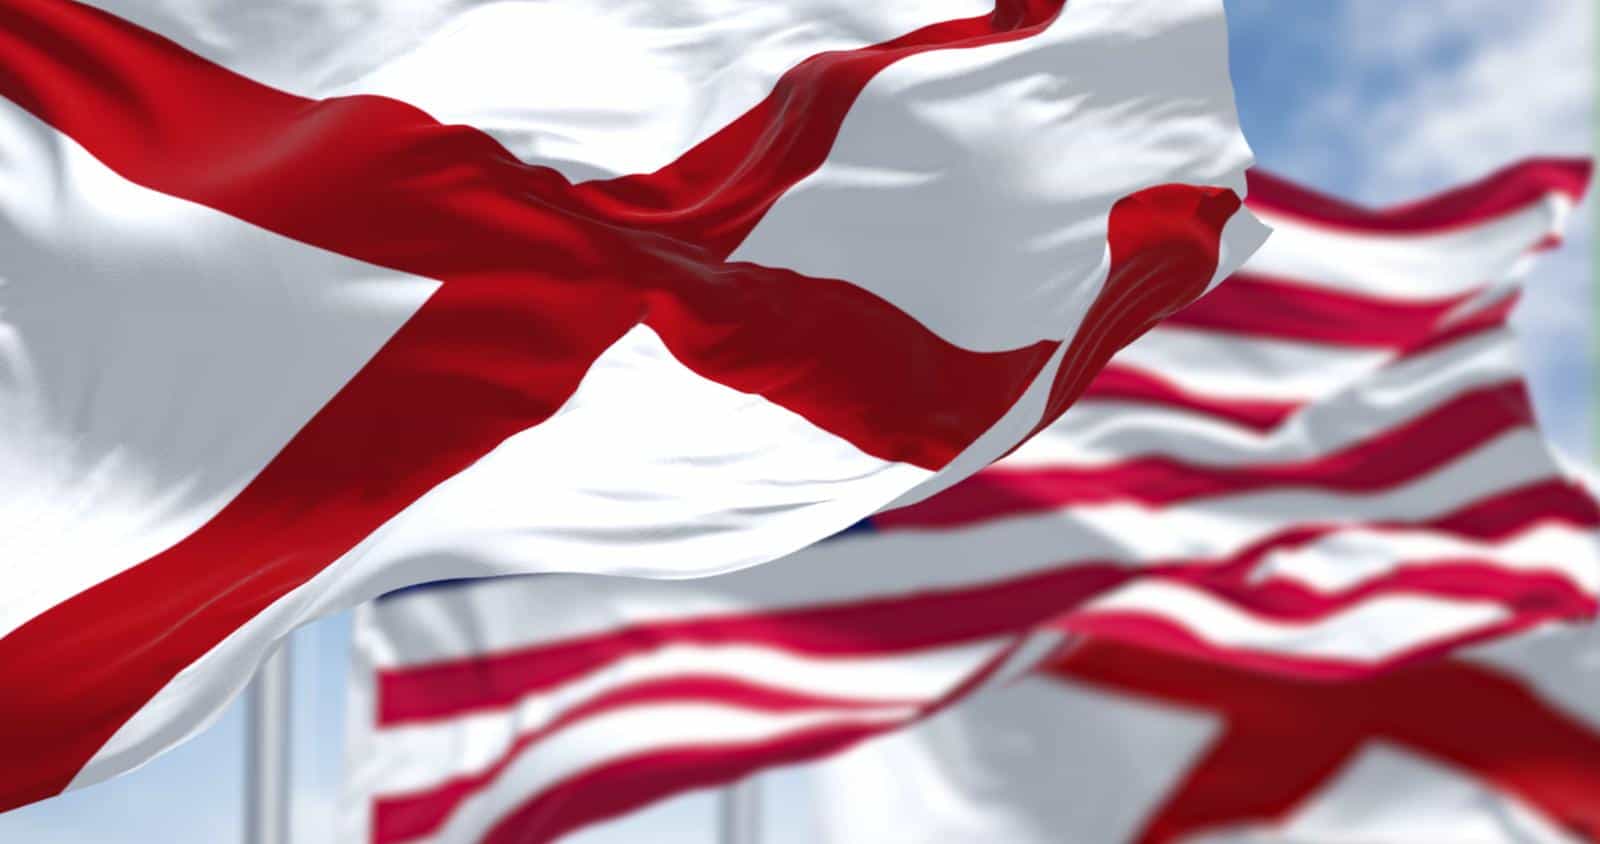 The flags of the Alabama state and United States of America waving in the wind. Alabama is a state in the Southeastern region of the United States. Democracy and independence. American state.